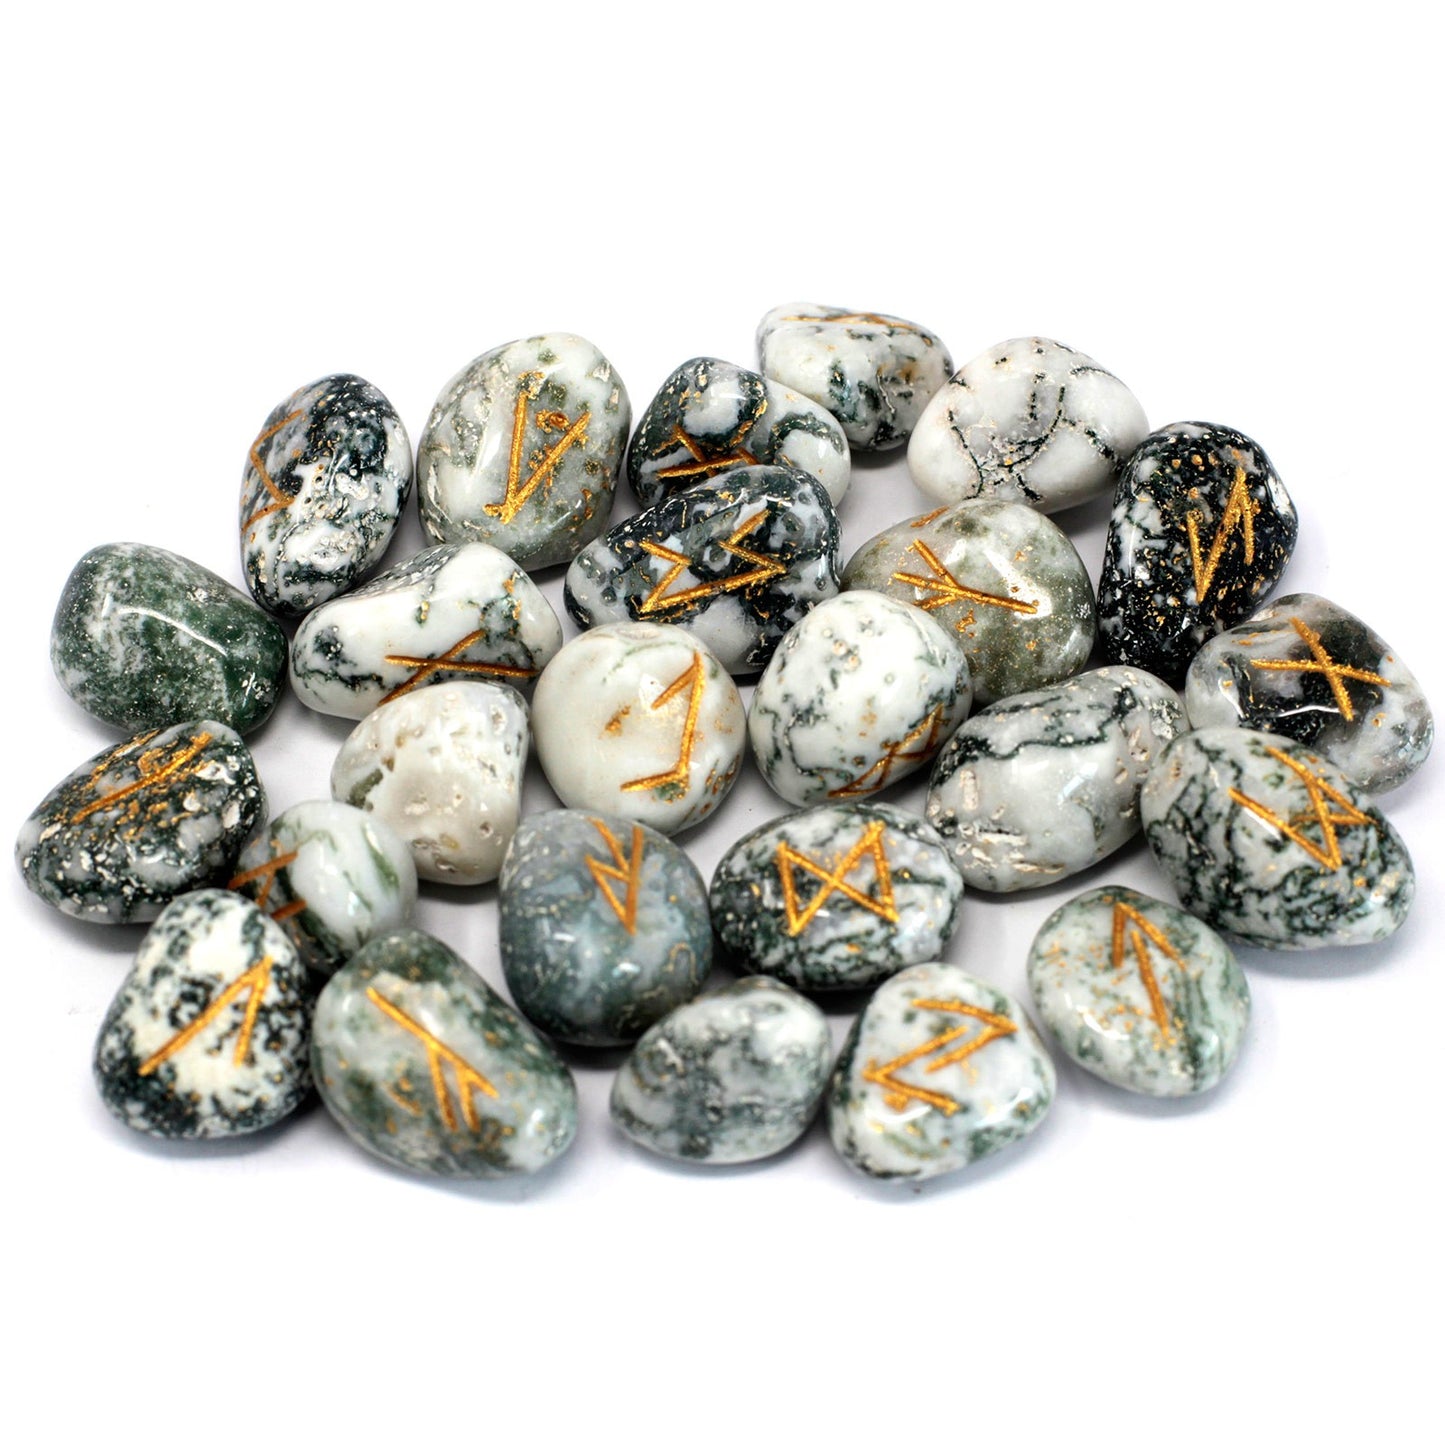 Tree Agate Runes Stone Set with Pouch, Cosmic Serenity Shop